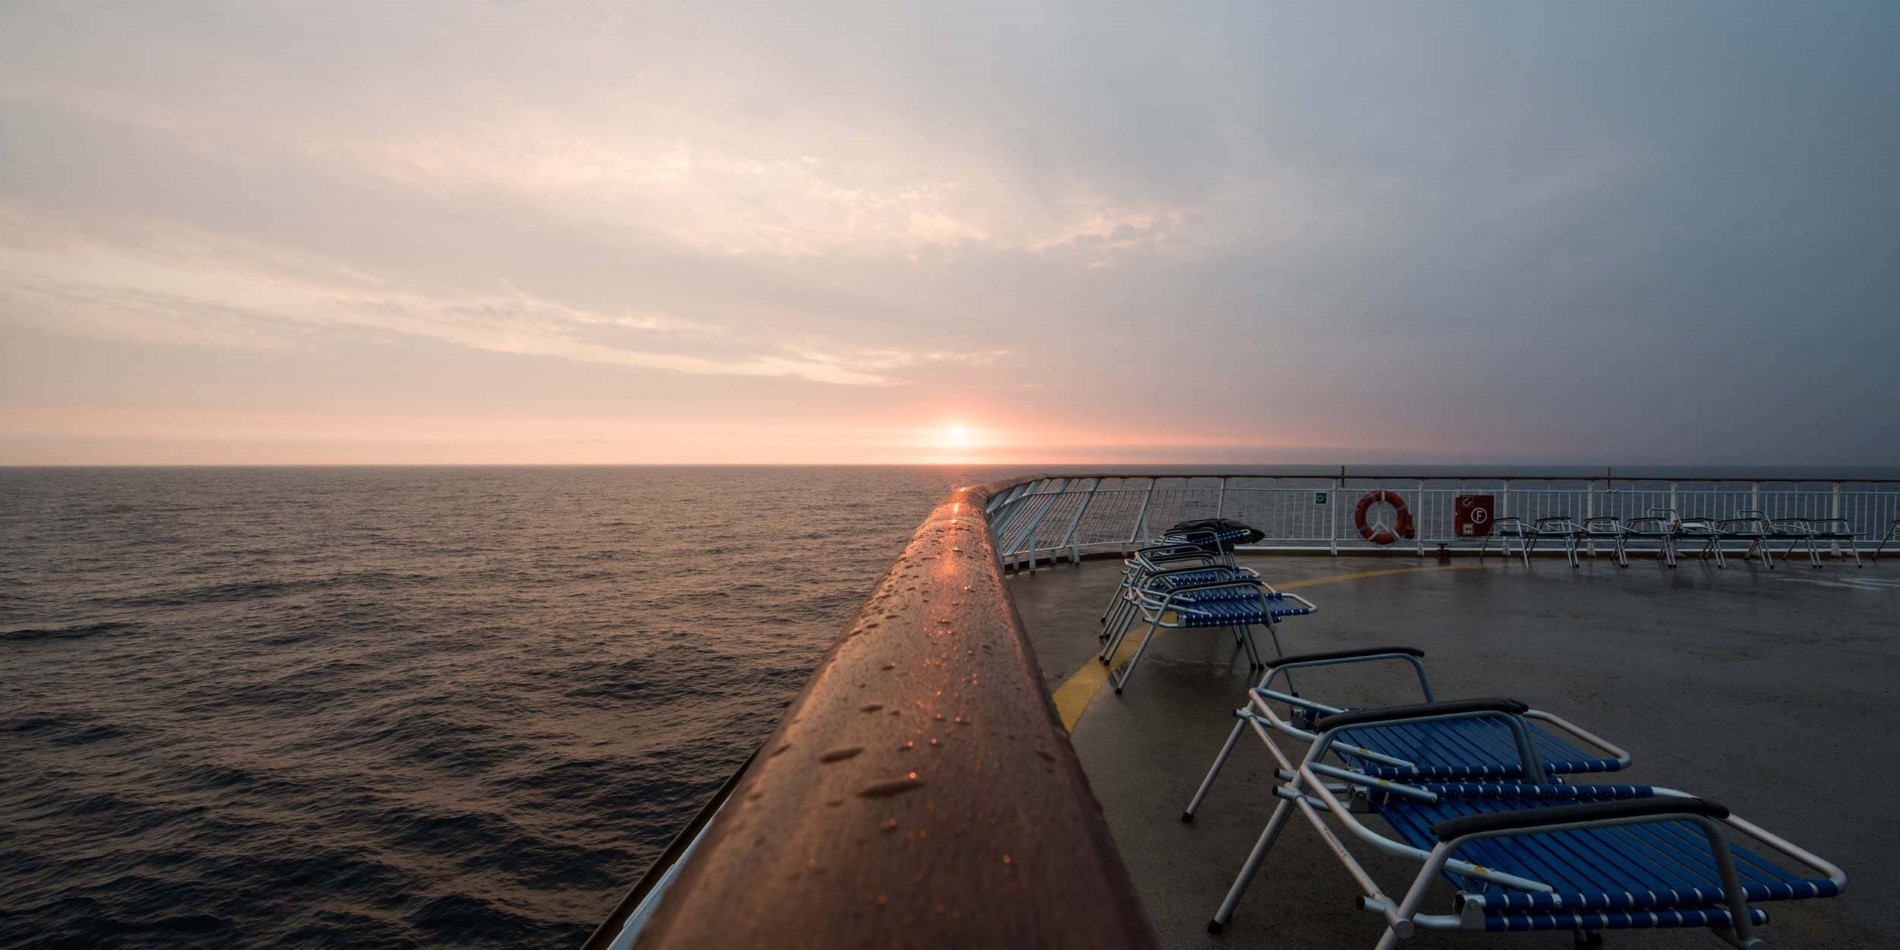 Sunset from MS Midnatsol in the Atlantic Ocean